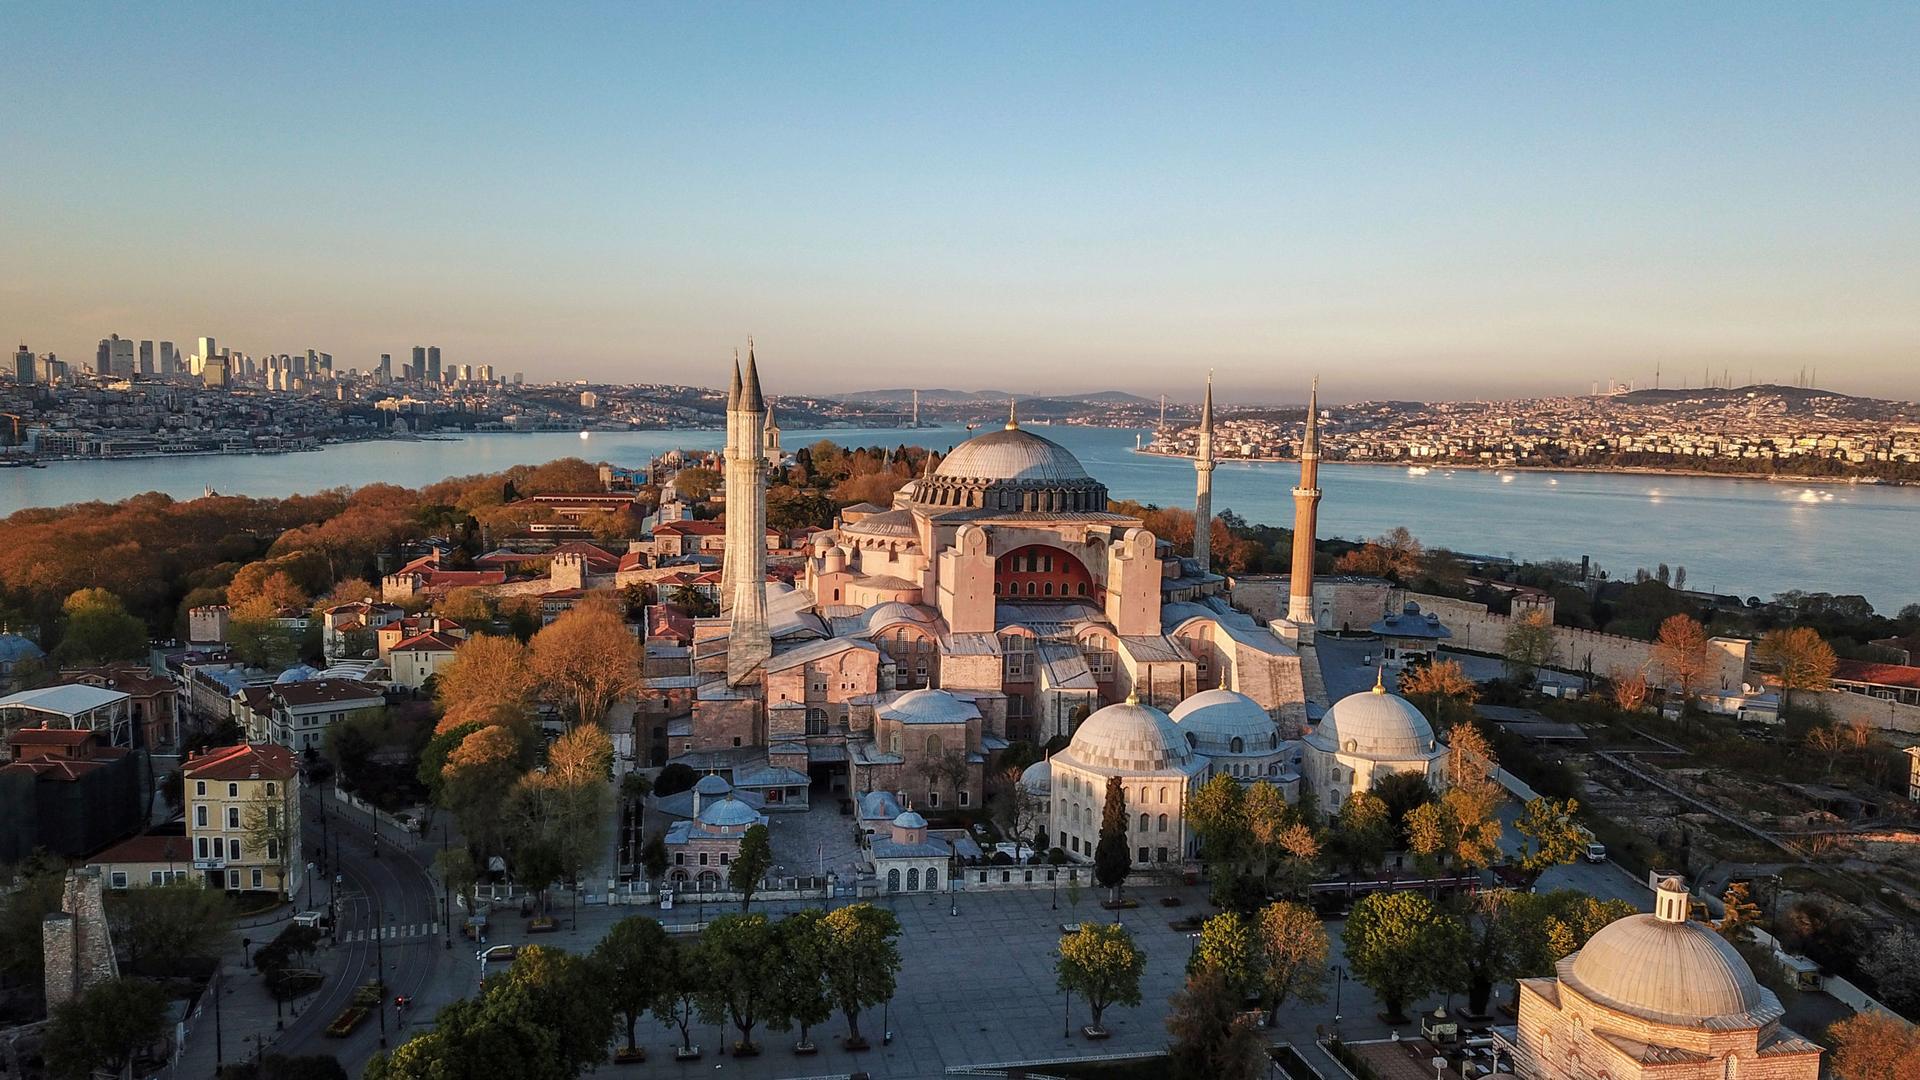 The large dome of the UNESCO World Heritage site Hagia Sophia is shown from above at a distance.